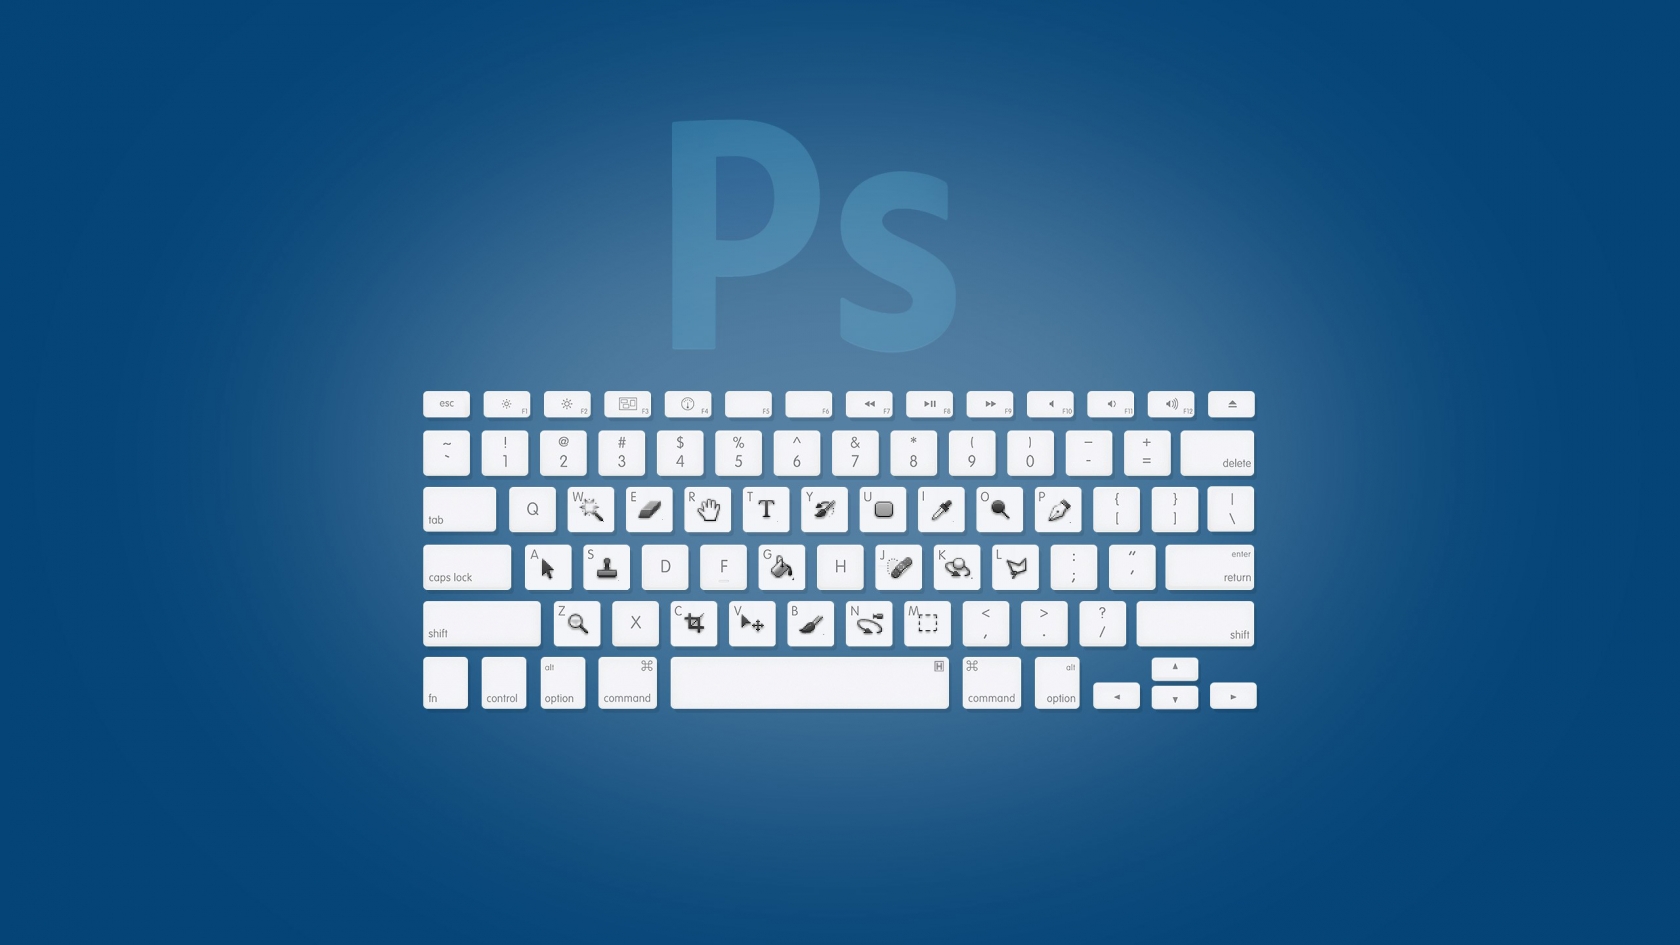 Photoshop Keyboard for 1680 x 945 HDTV resolution